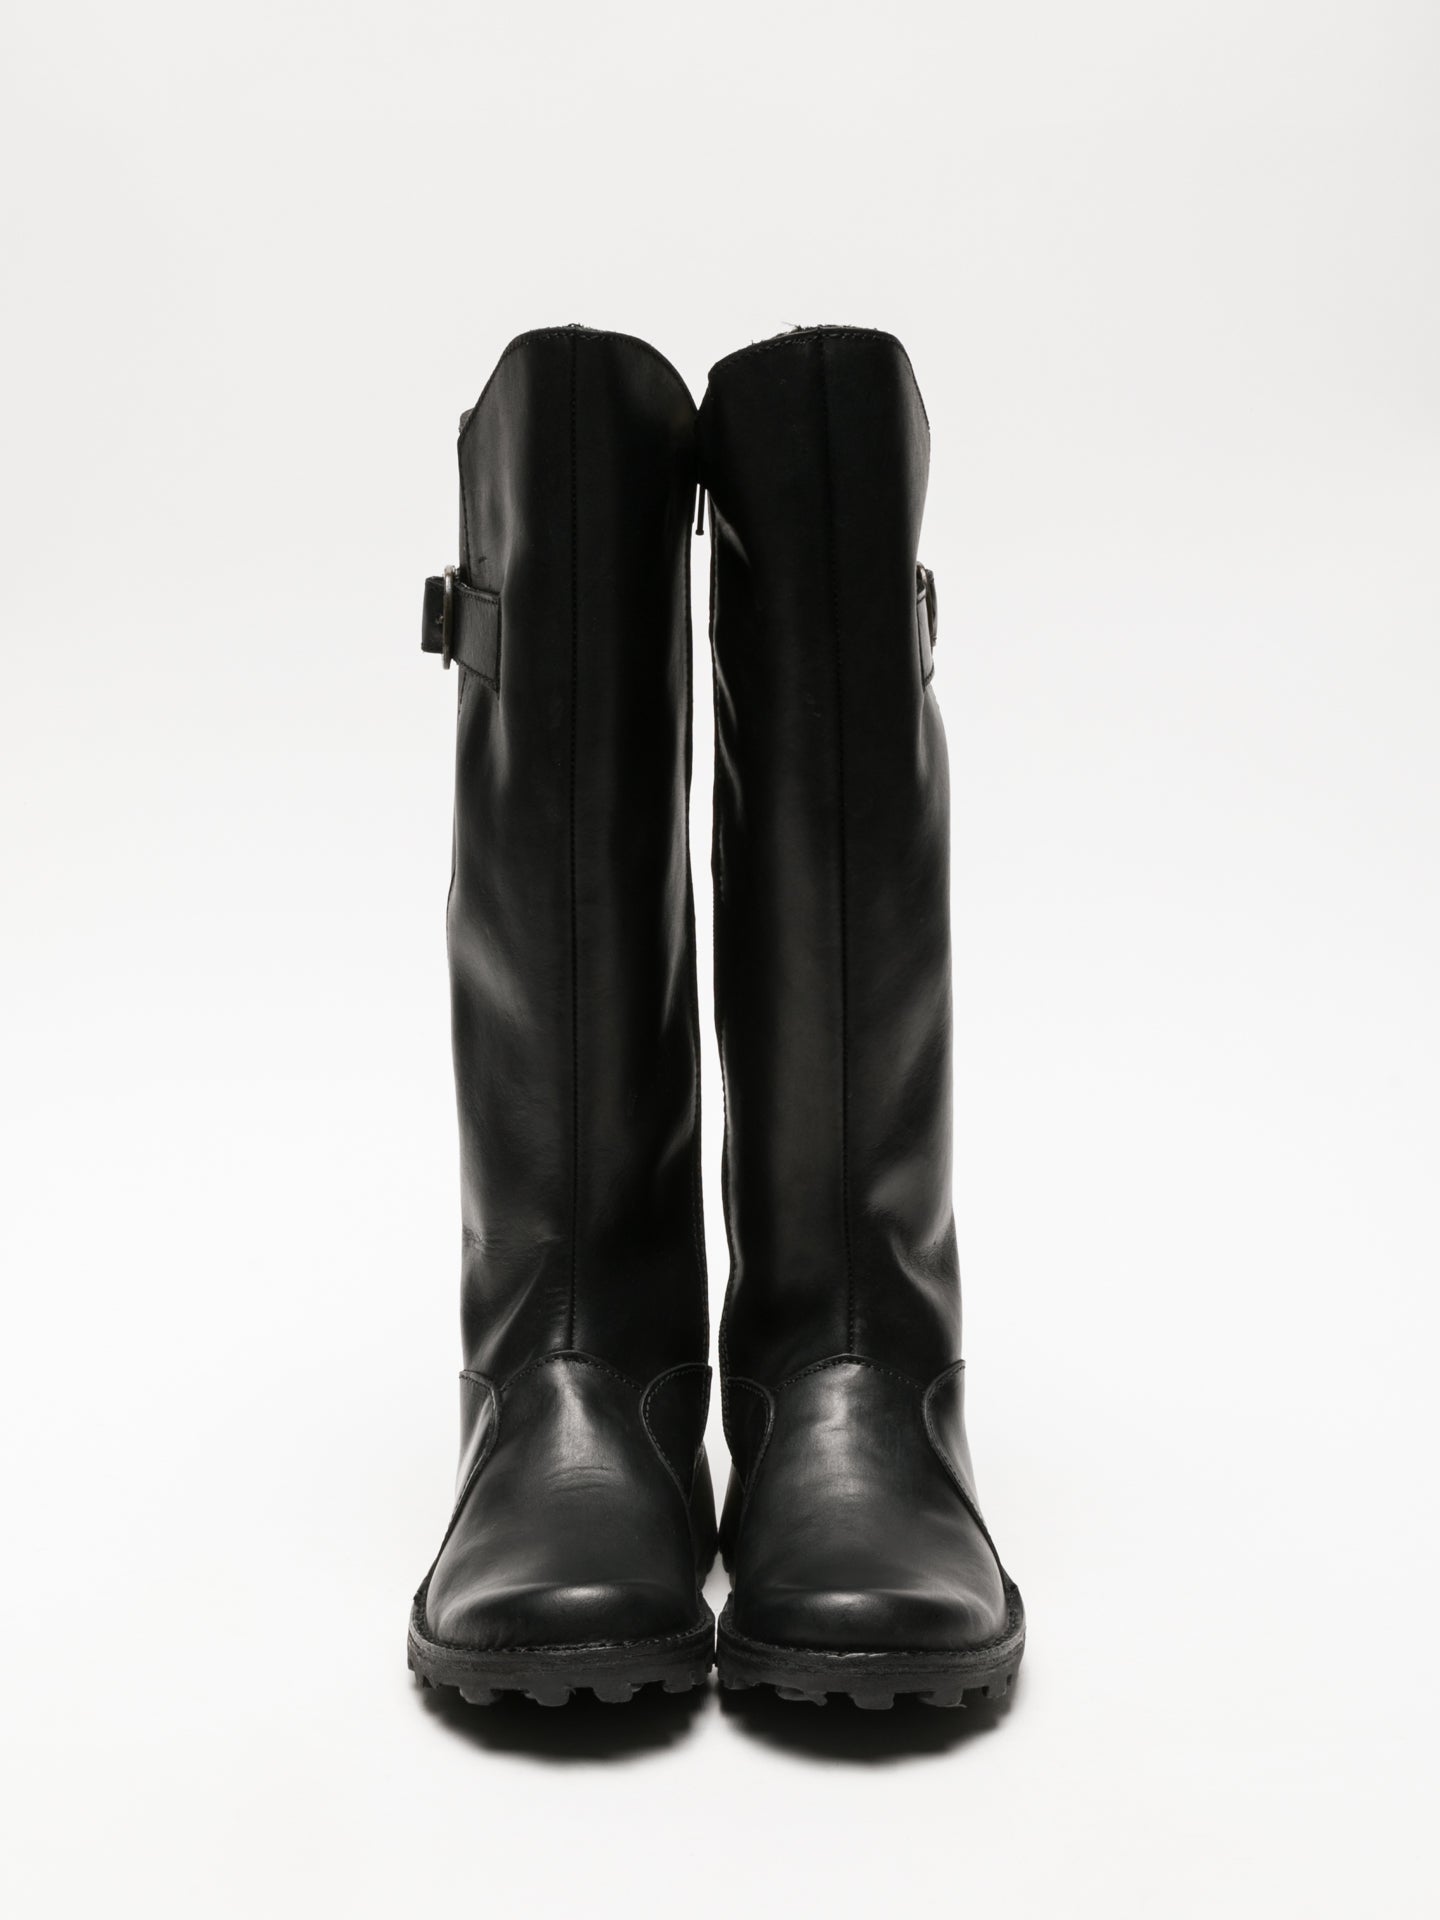 Fly London Coal Black Zip Up Boots